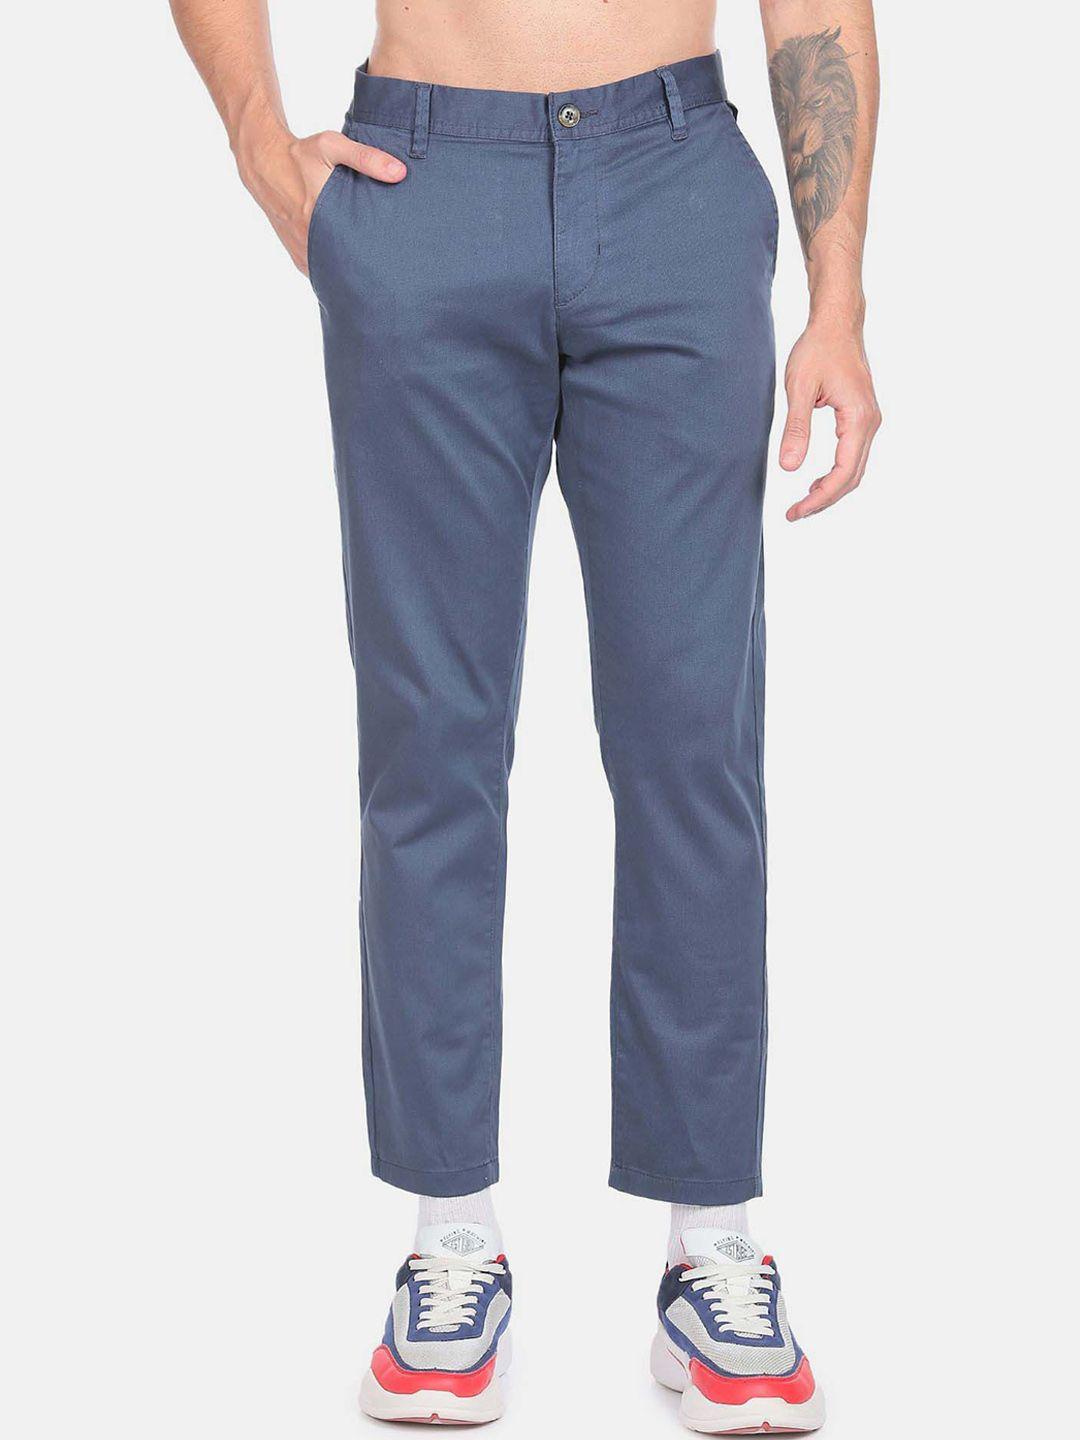 flying-machine-men-slim-fit-casual-trousers